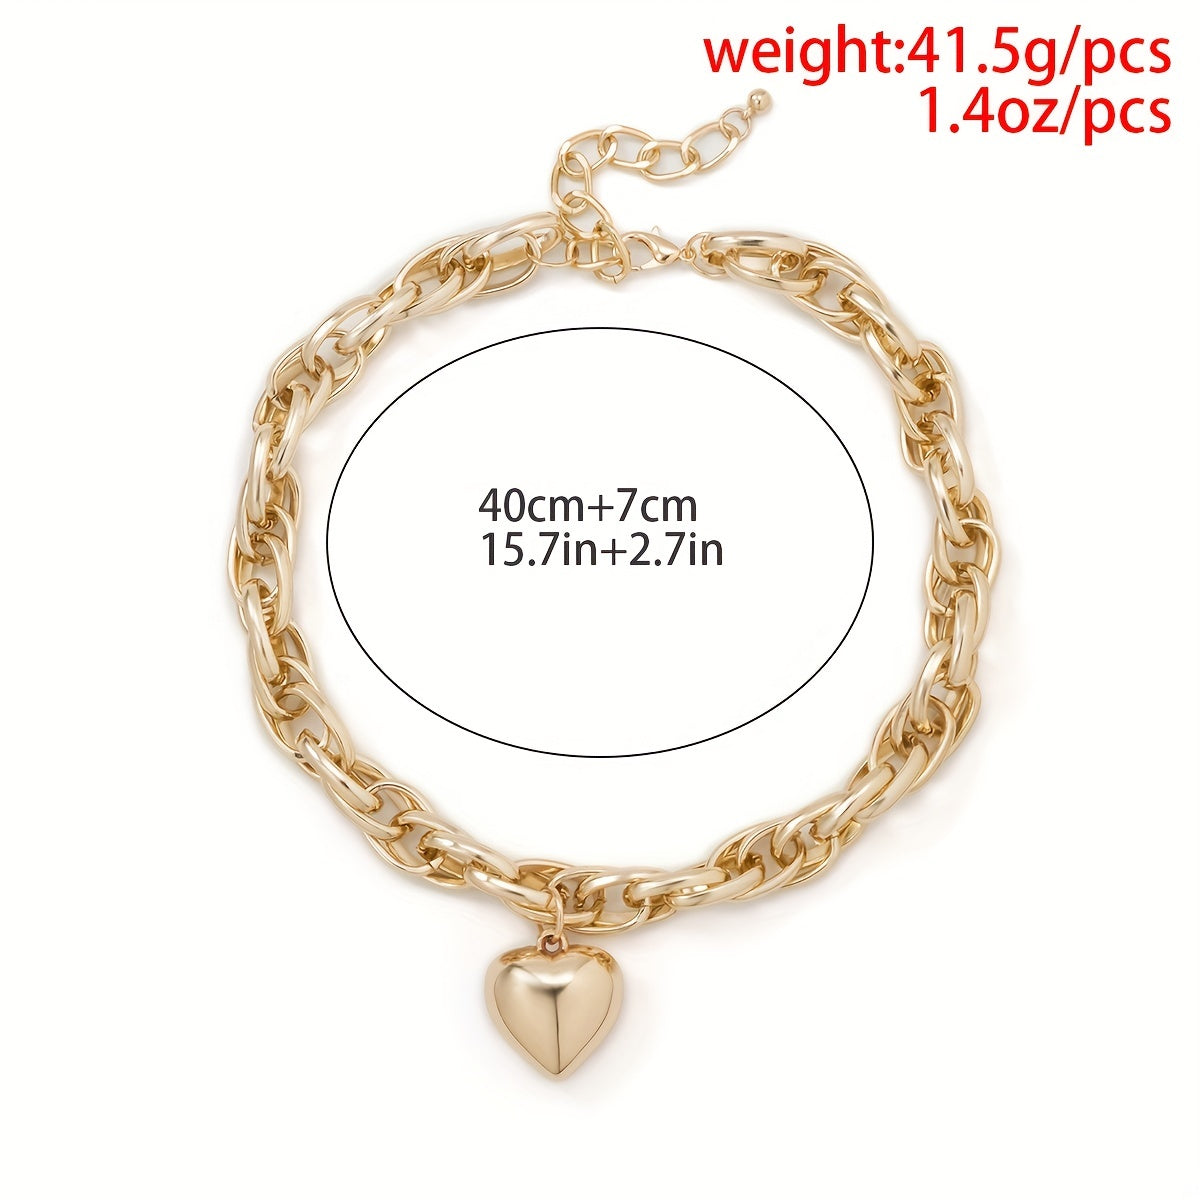 Upgrade Your Style with Our Simple Hip Hop Heart Chain Necklace for Women